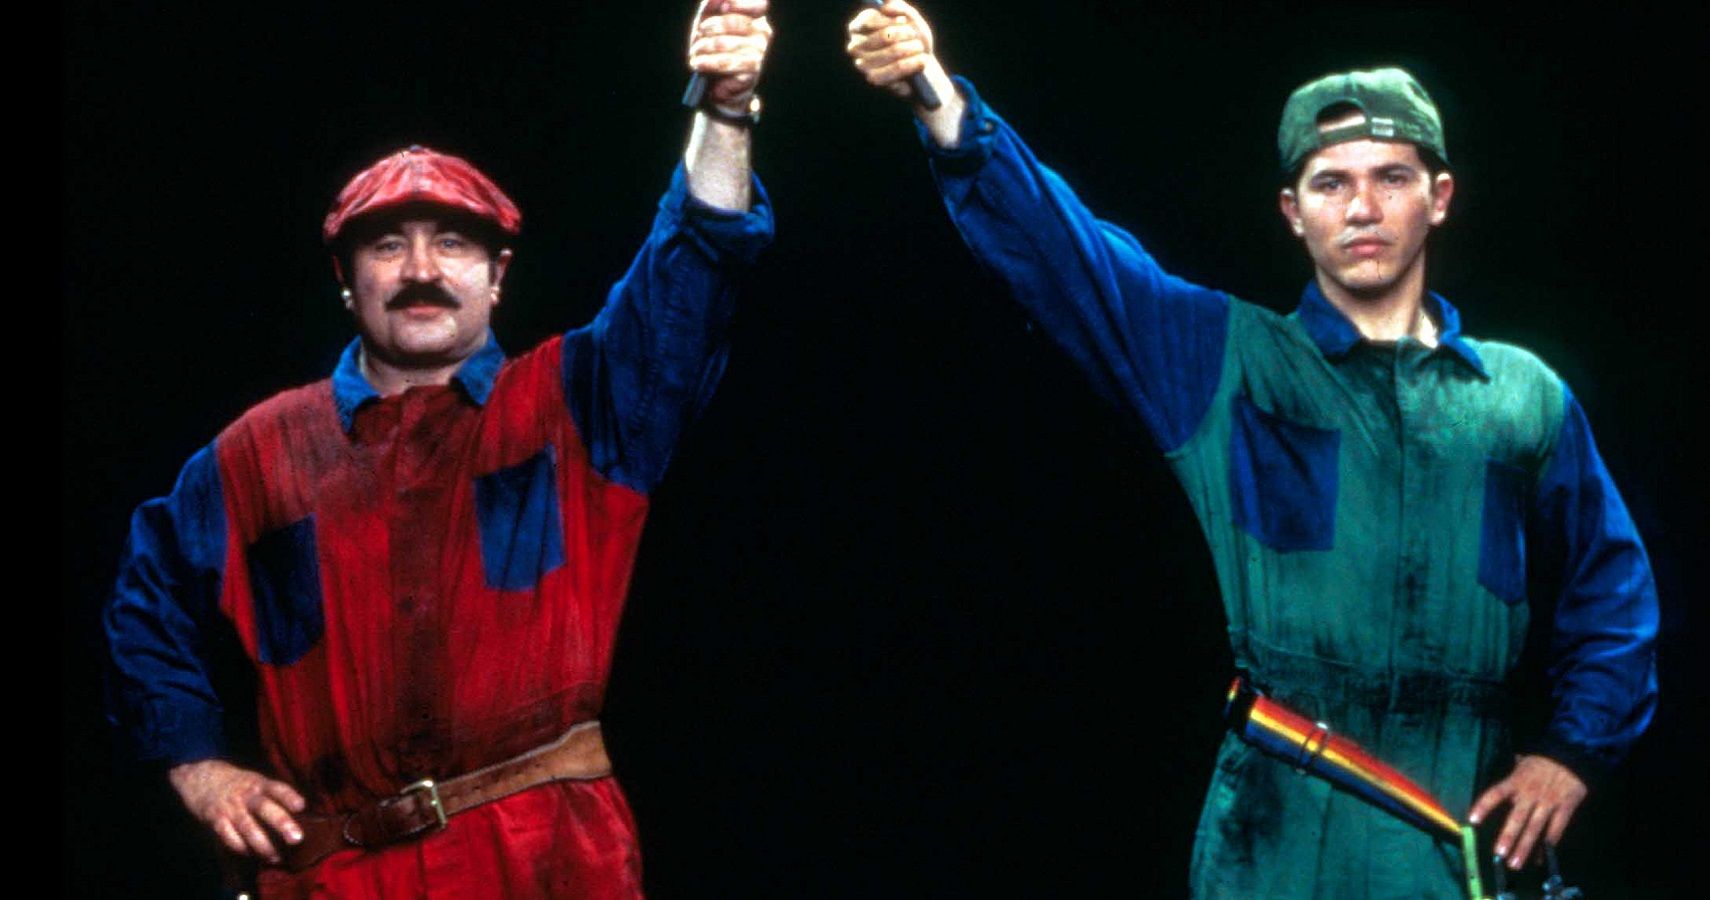 5 Reasons The Super Mario Bros. Movie Isn't That Bad (And 5 Why It Is)